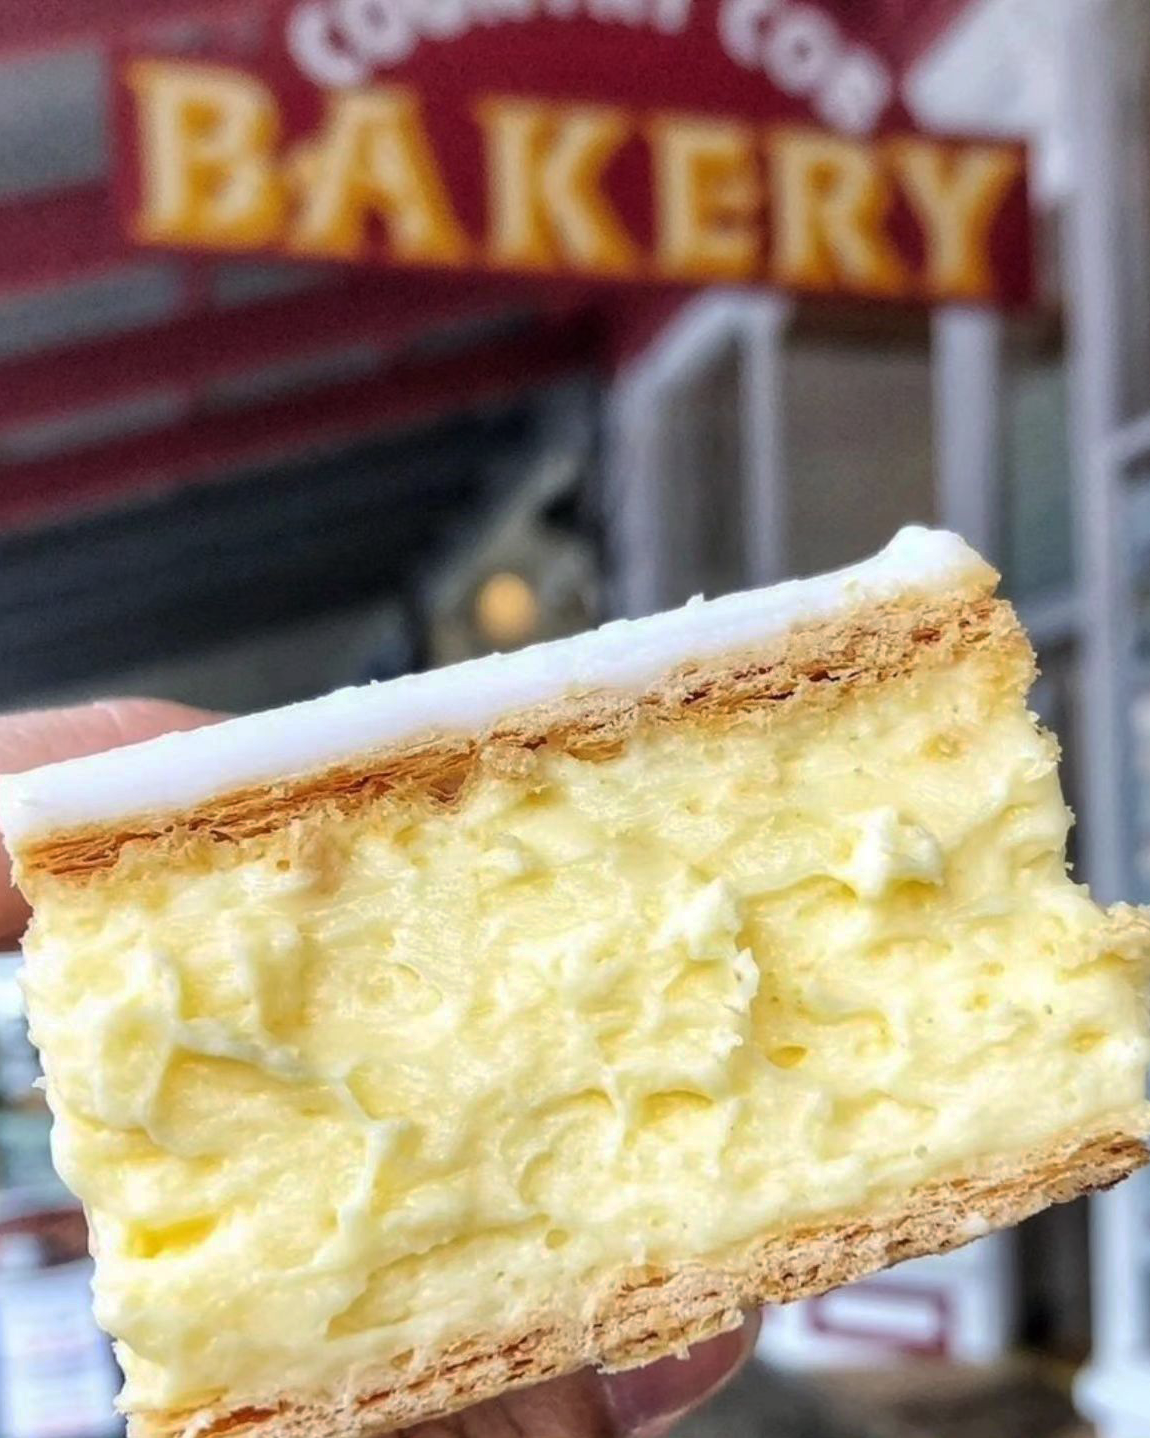 A person holding up an award-winning vanilla slice melbourne out front a bakery.